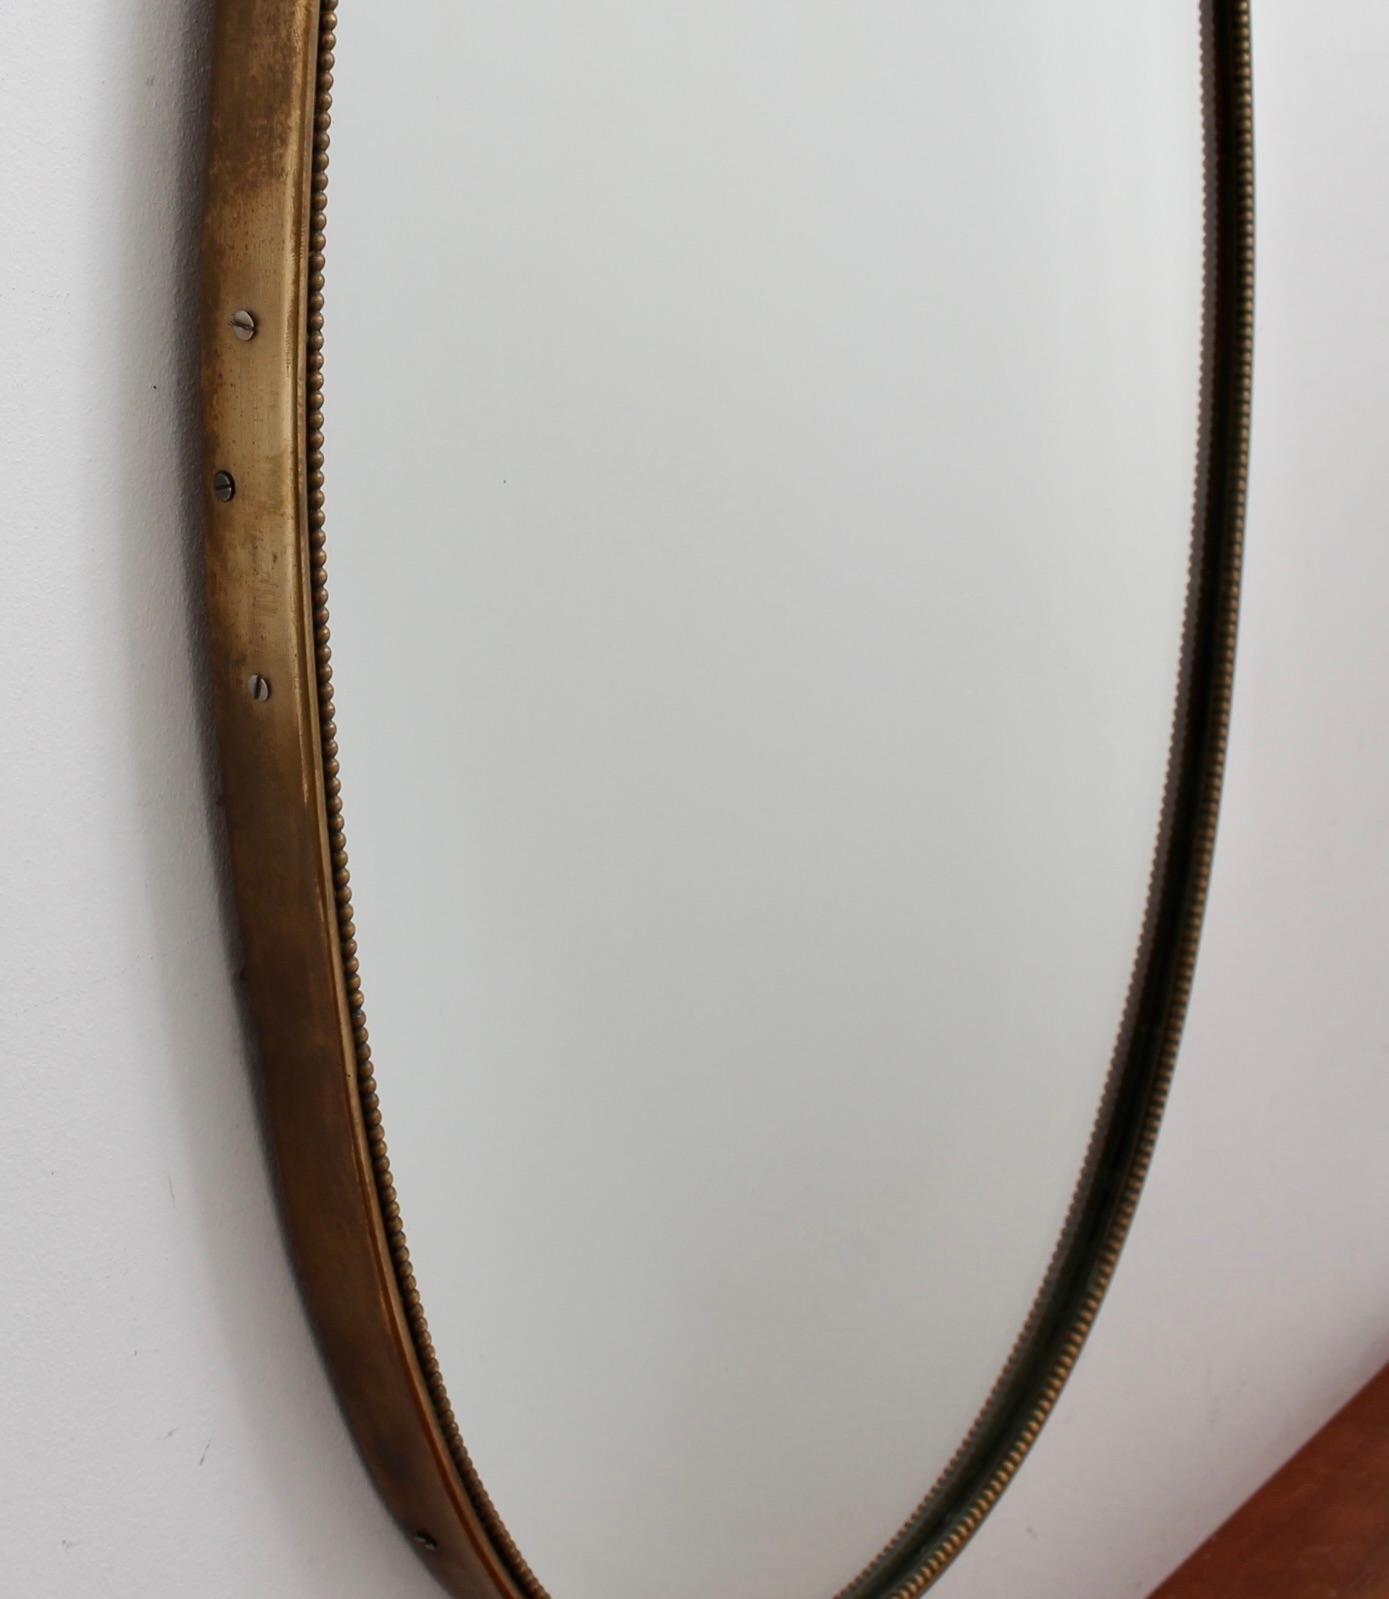 Vintage Italian Oval Wall Mirror with Brass Frame and Beading (circa 1950s) For Sale 1